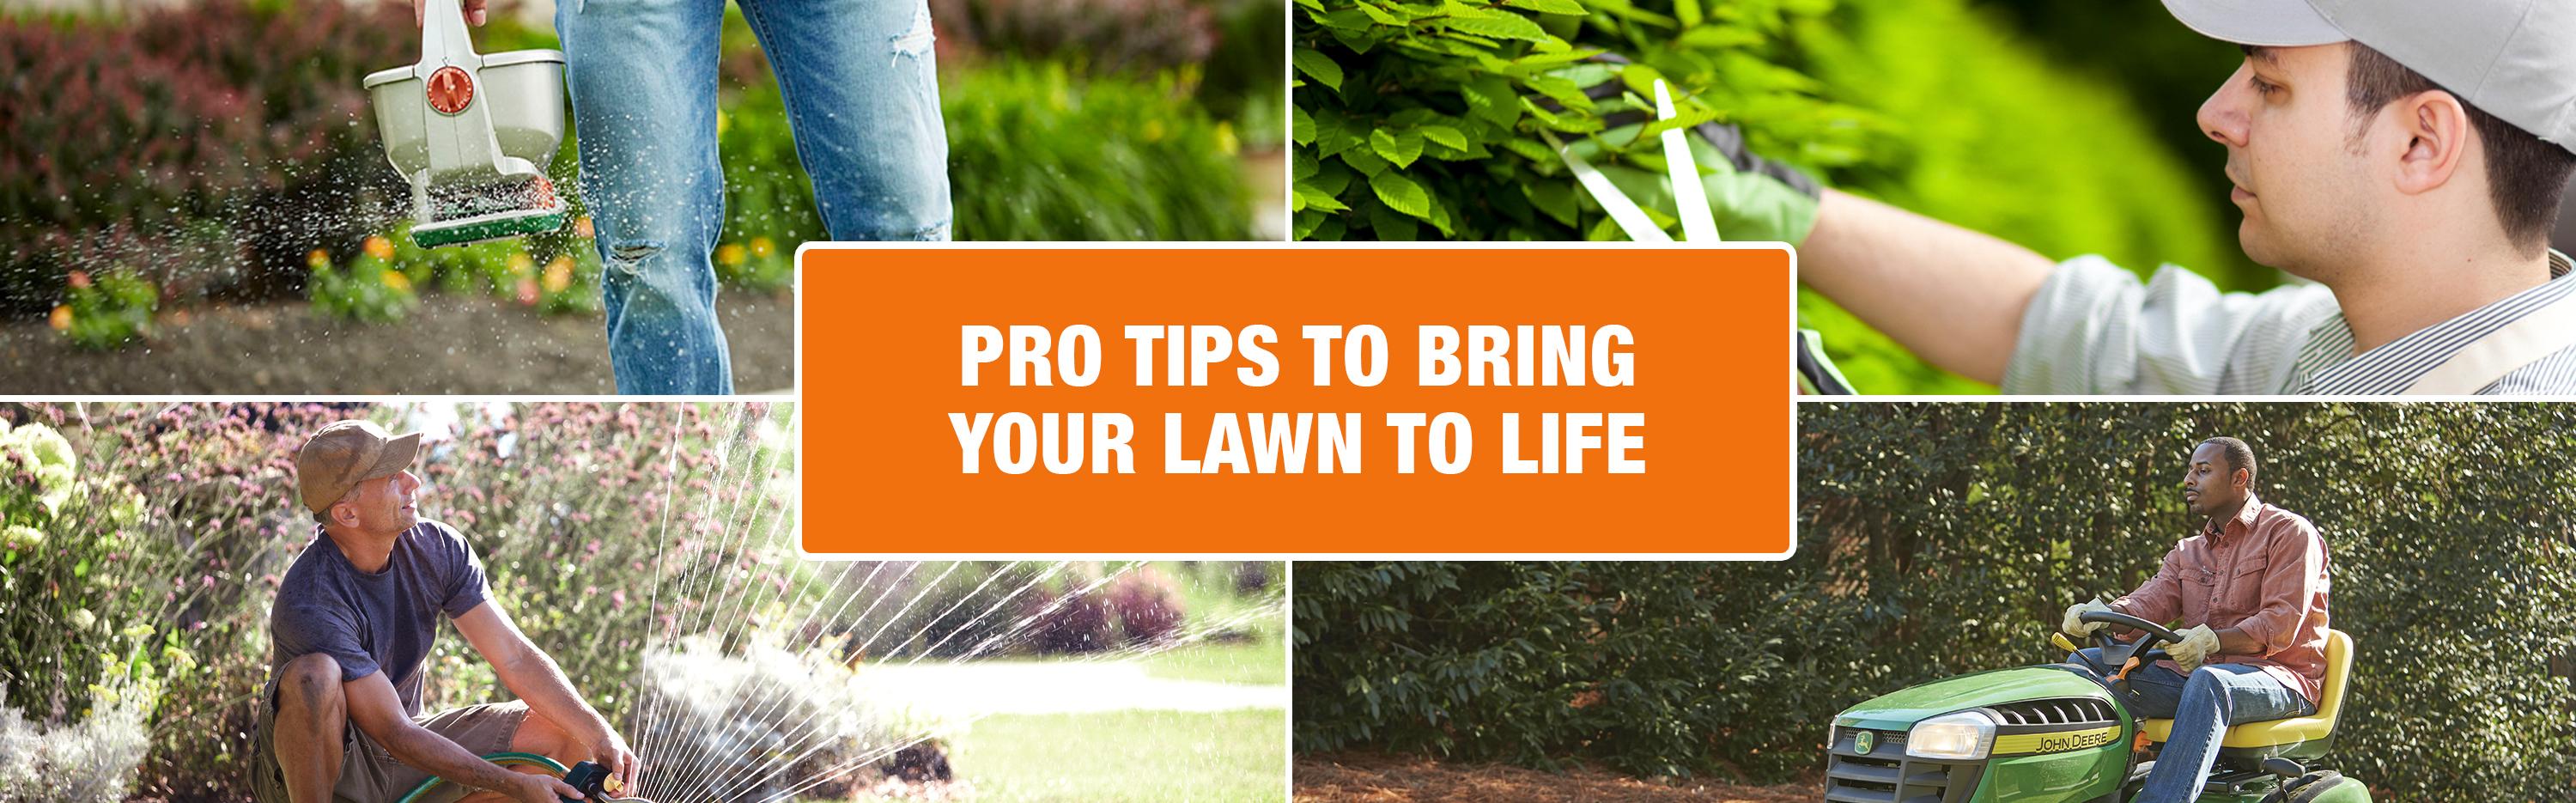 Improve your lawn care with these tips 